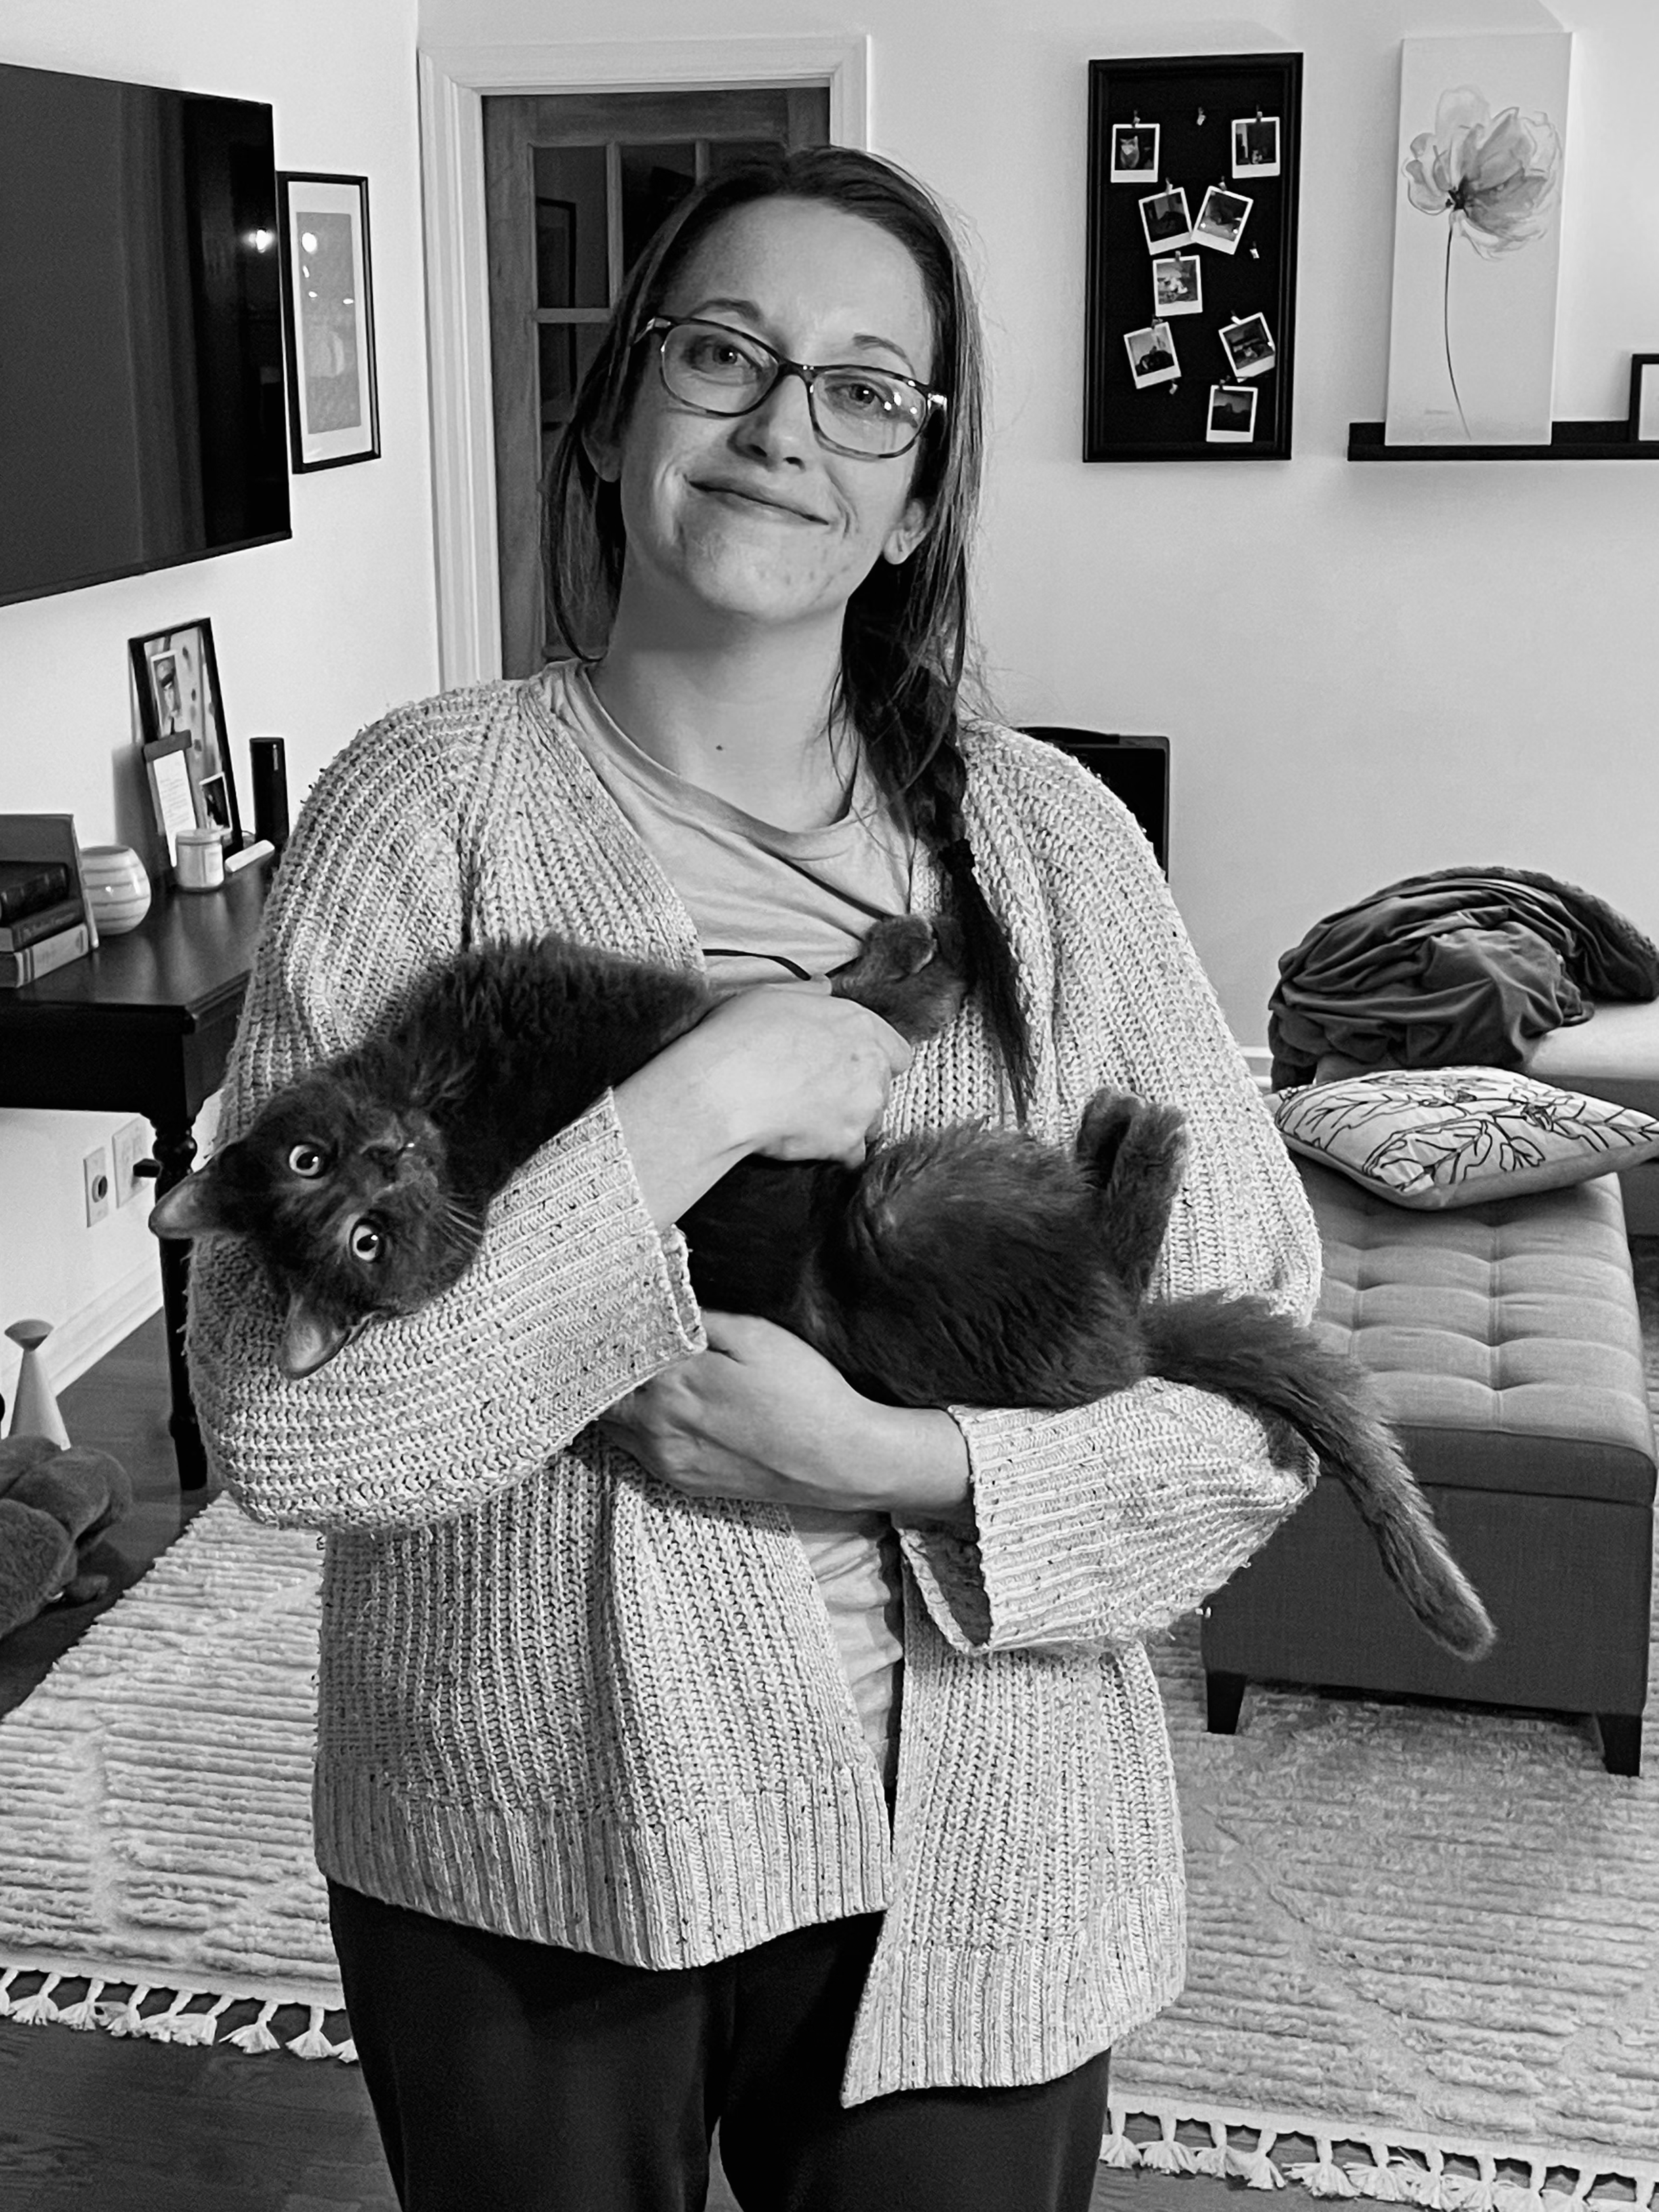 Katy Williams holding cat in home